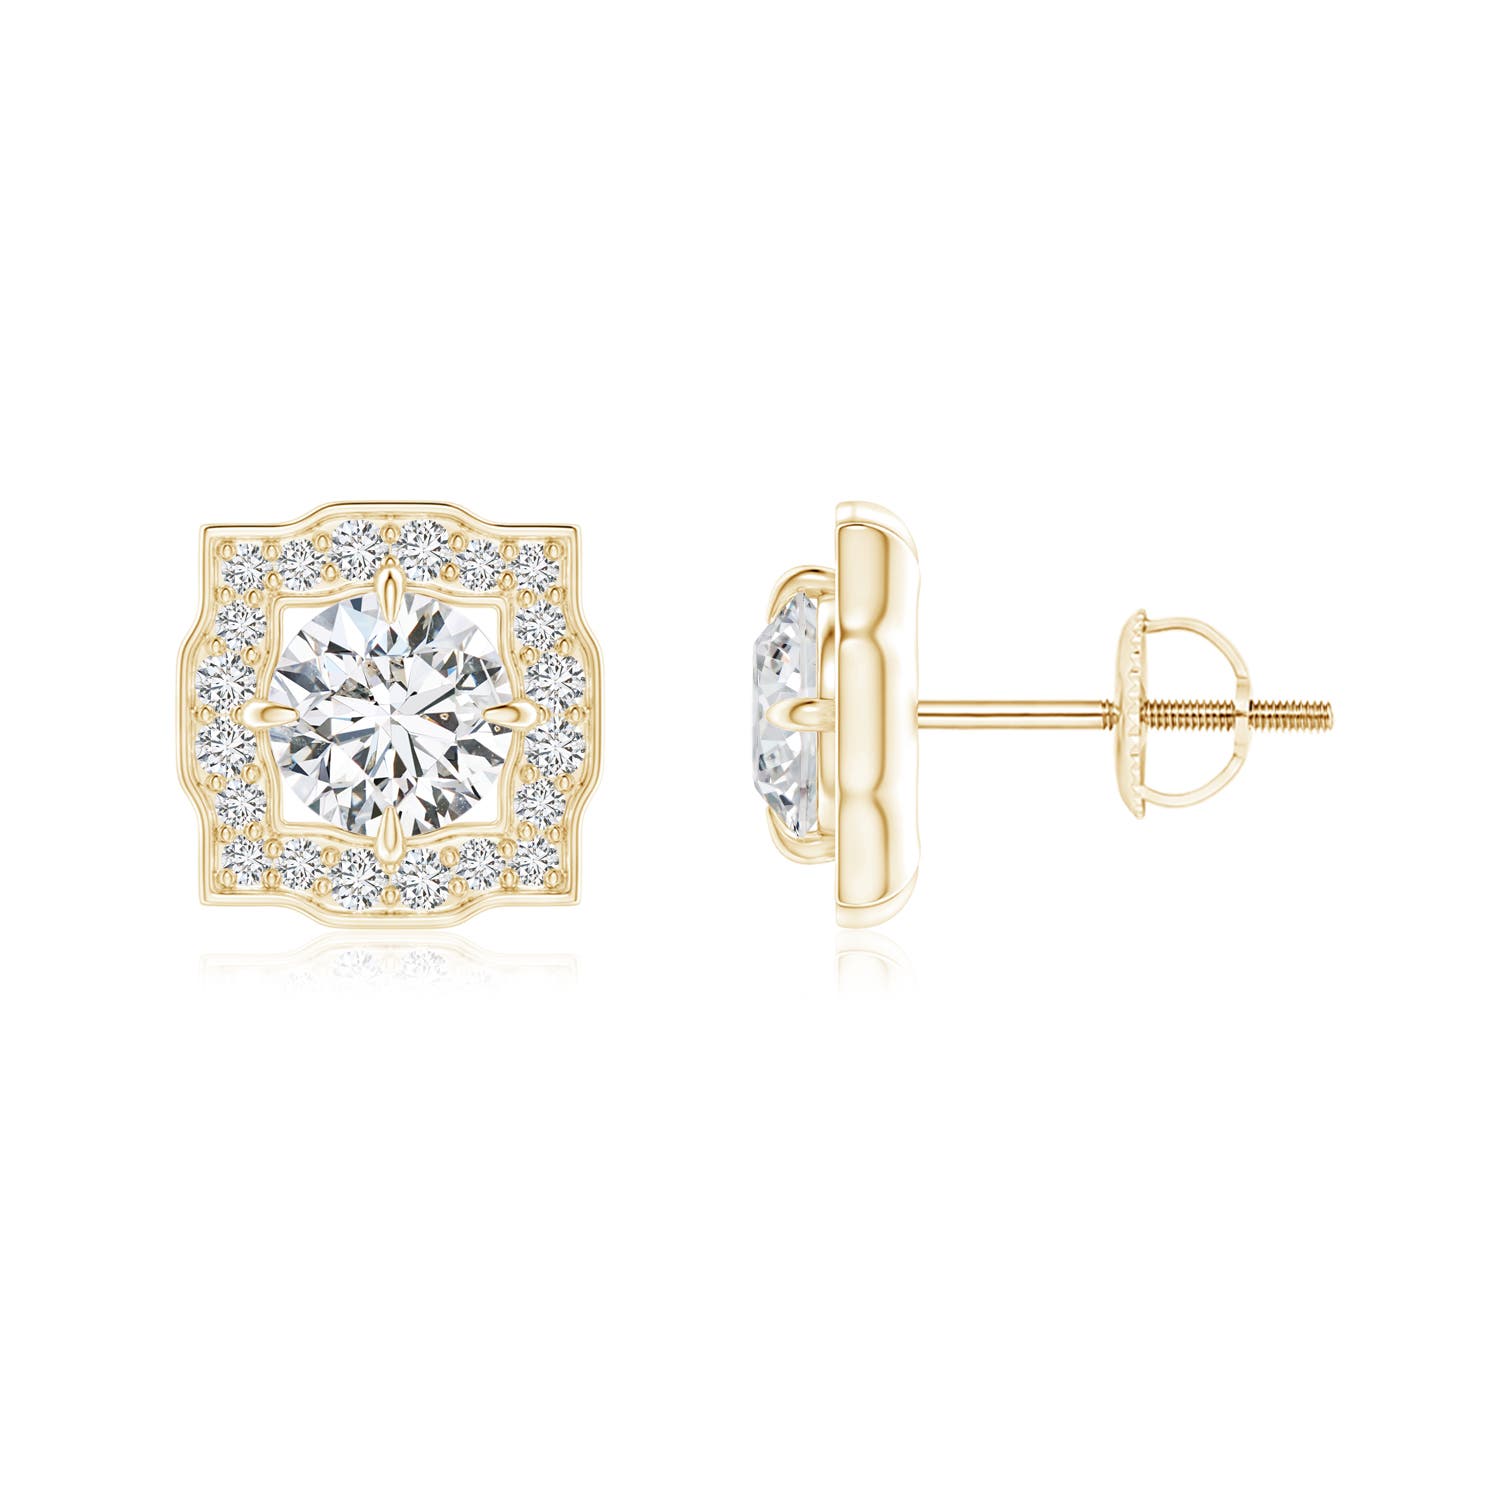 H, SI2 / 0.83 CT / 14 KT Yellow Gold